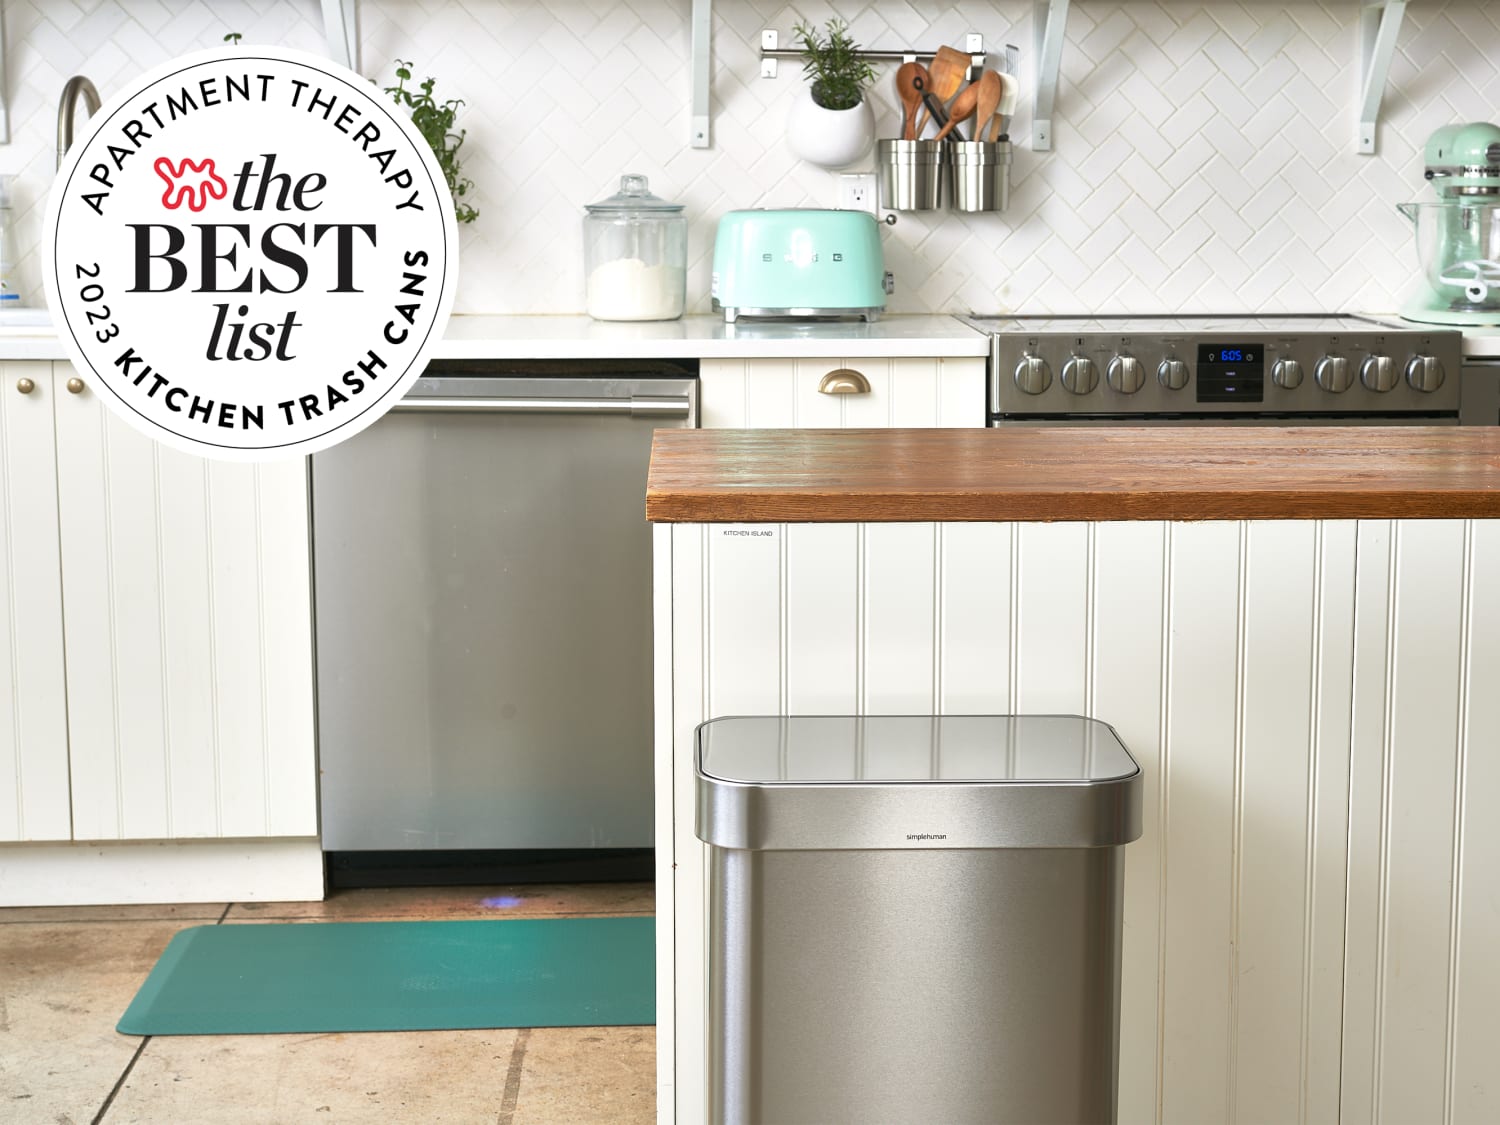 https://cdn.apartmenttherapy.info/image/upload/f_jpg,q_auto:eco,c_fill,g_auto,w_1500,ar_4:3/AT%20Best%20List%2Fbest-list-kitchen-trash-cans